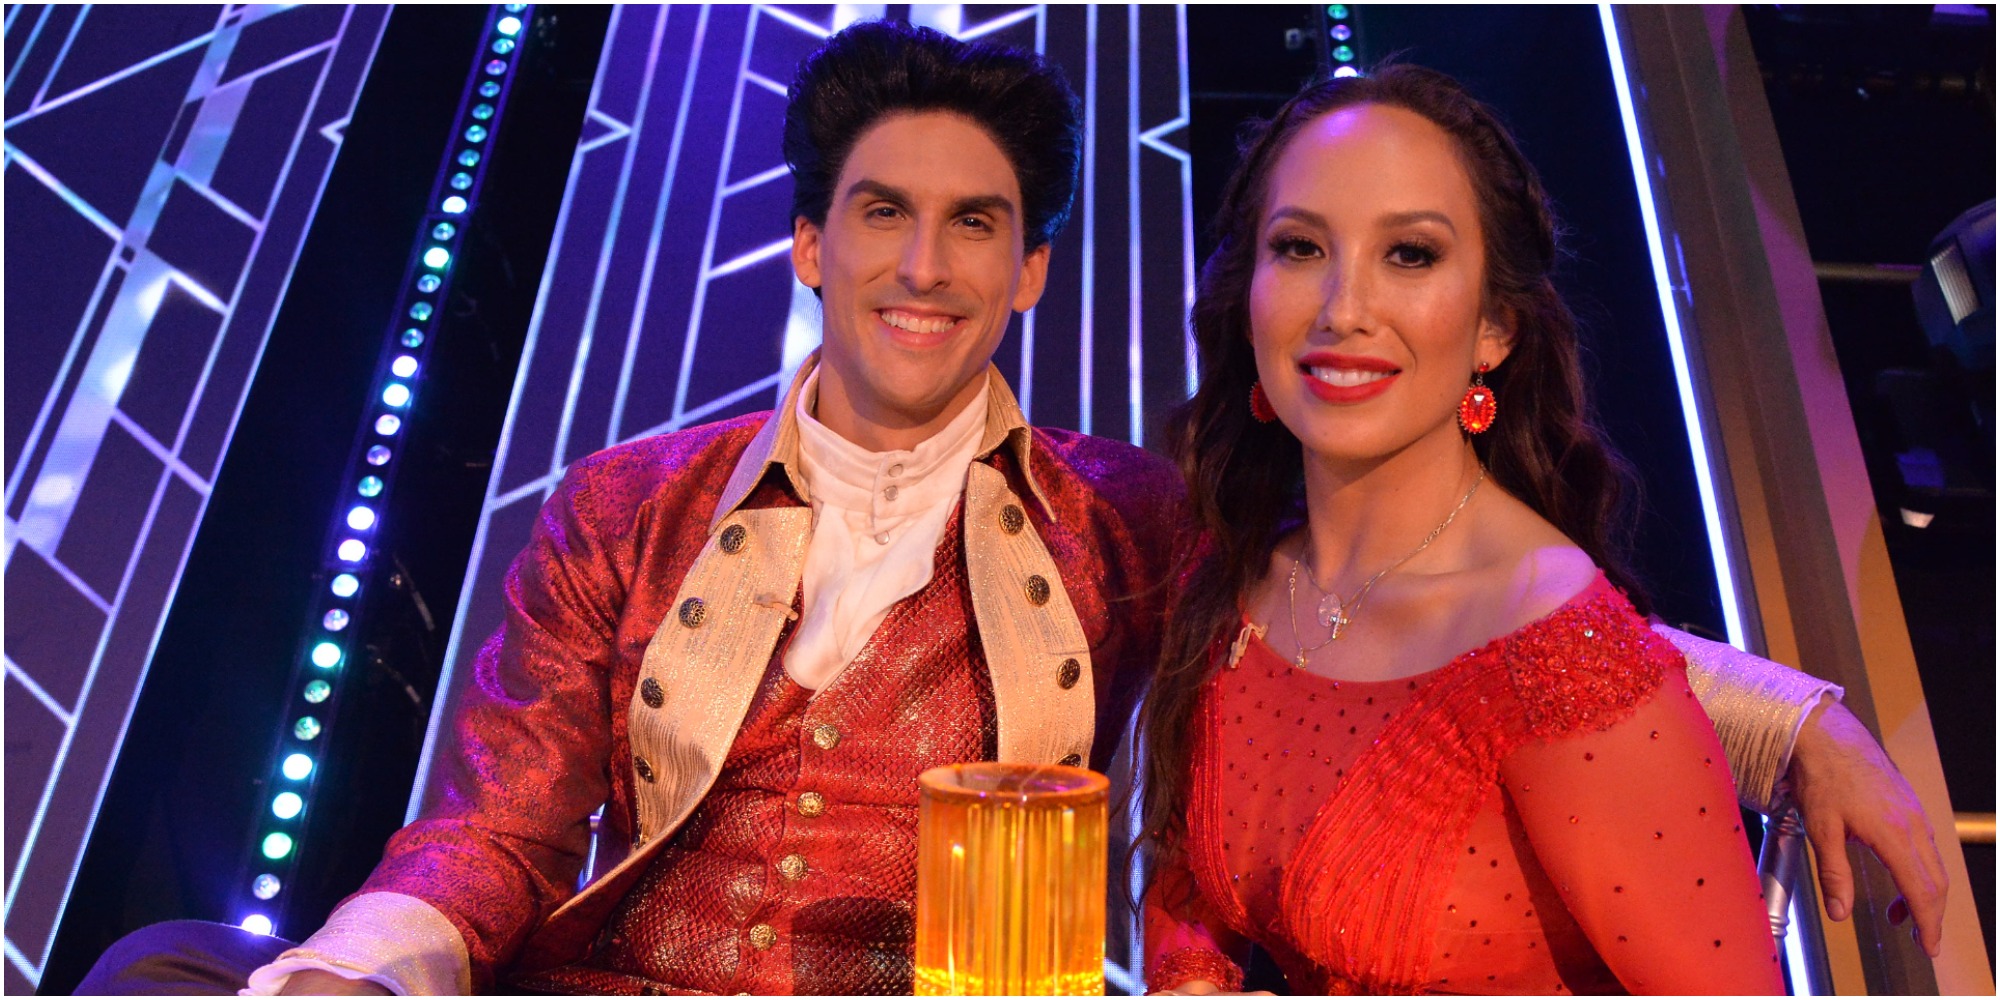 Cheryl Burke and Cody Rigsby on the set of "Dancing with the Stars."